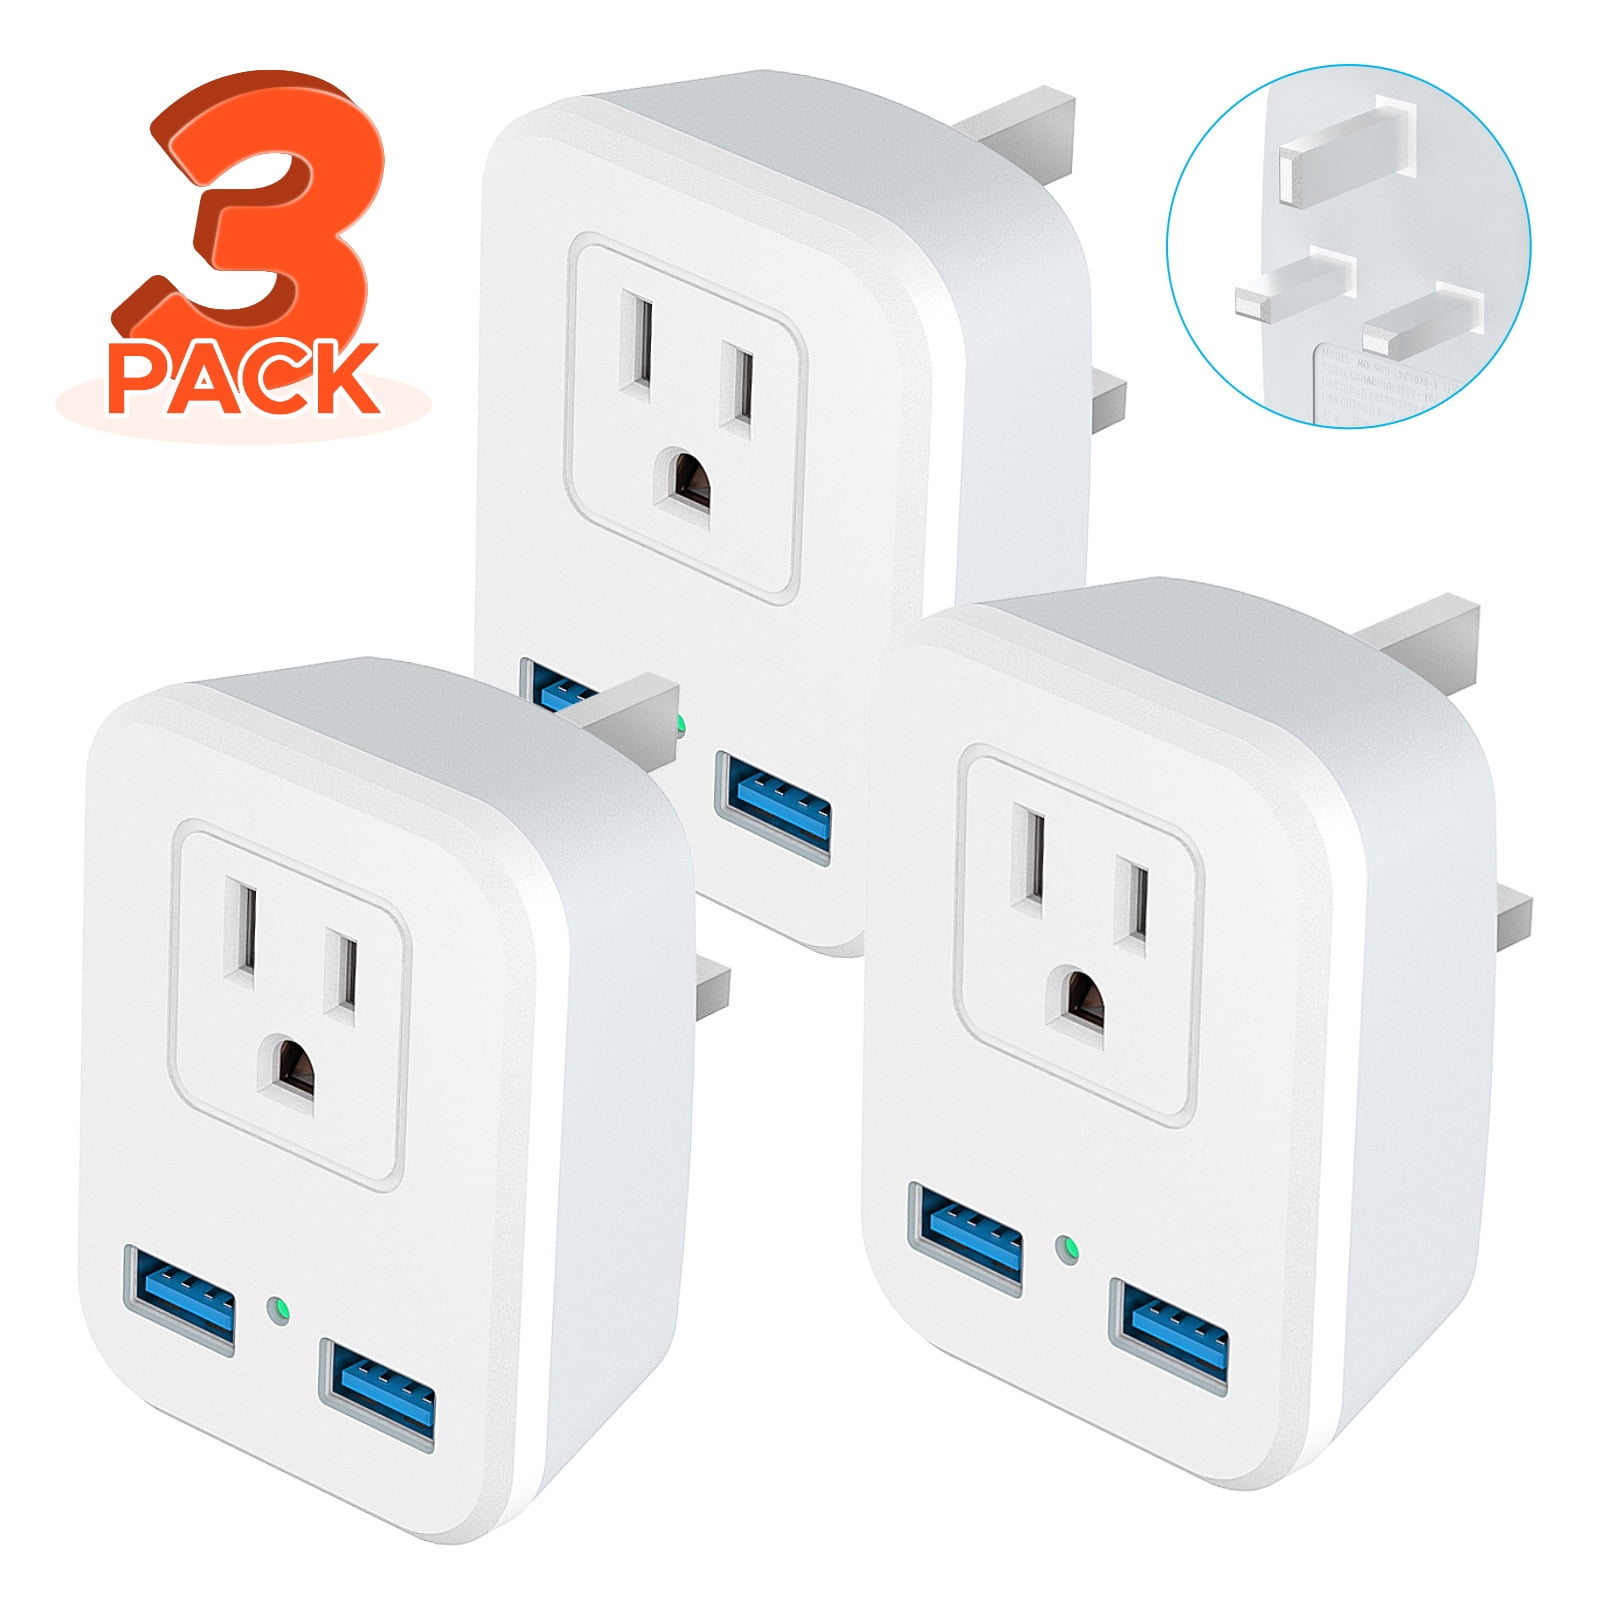 UK Power Adapter Travel Converter, AC Outlet Dual USB Port Wall Charger G) for US to British Dubai and More (3Pack) - Walmart.com